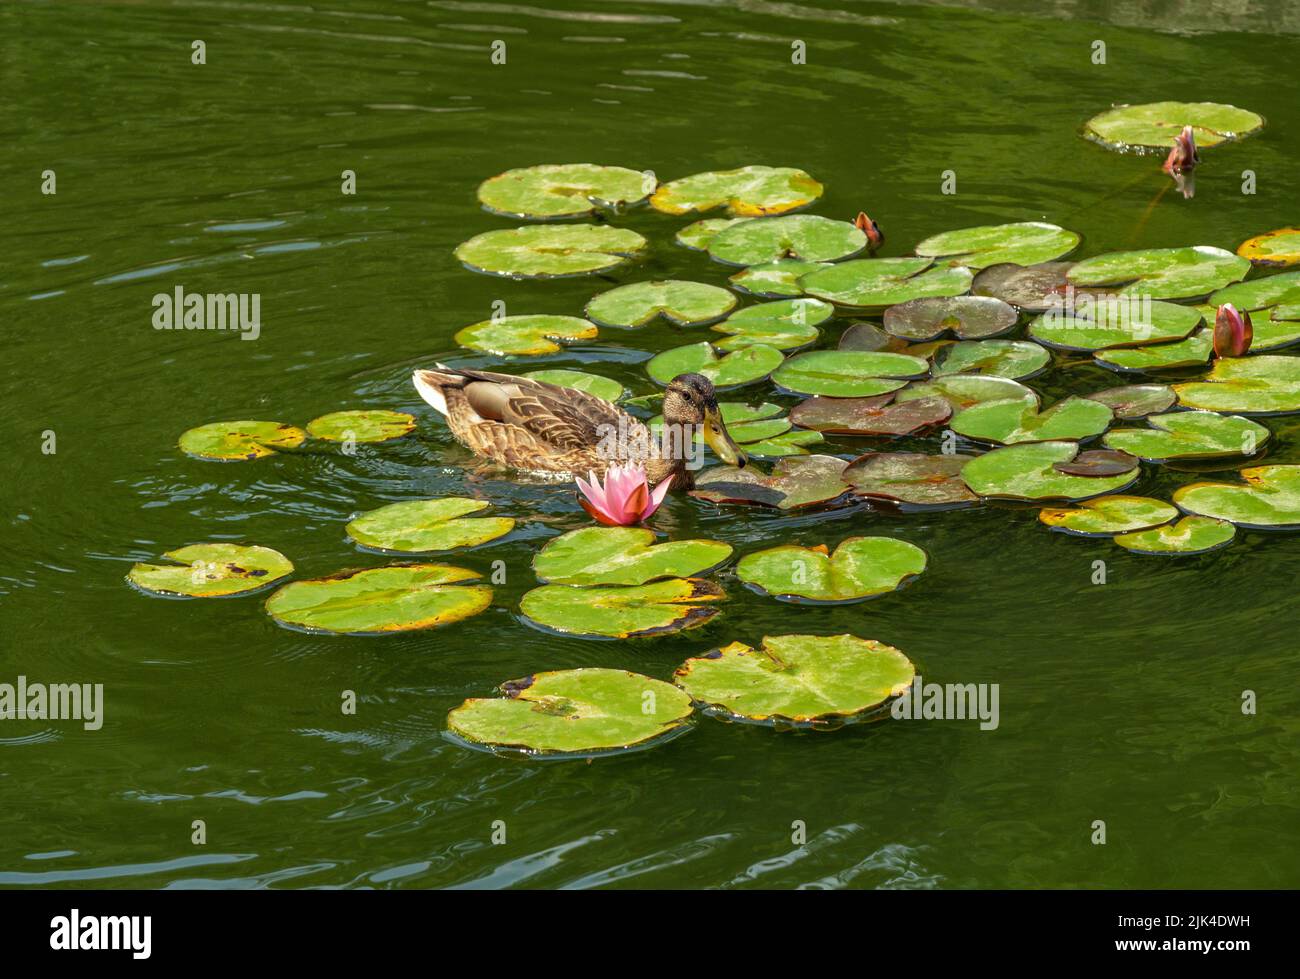 Wild brown mallard duck on a green pond water with pink lotus flower and green leaves on the surface Stock Photo